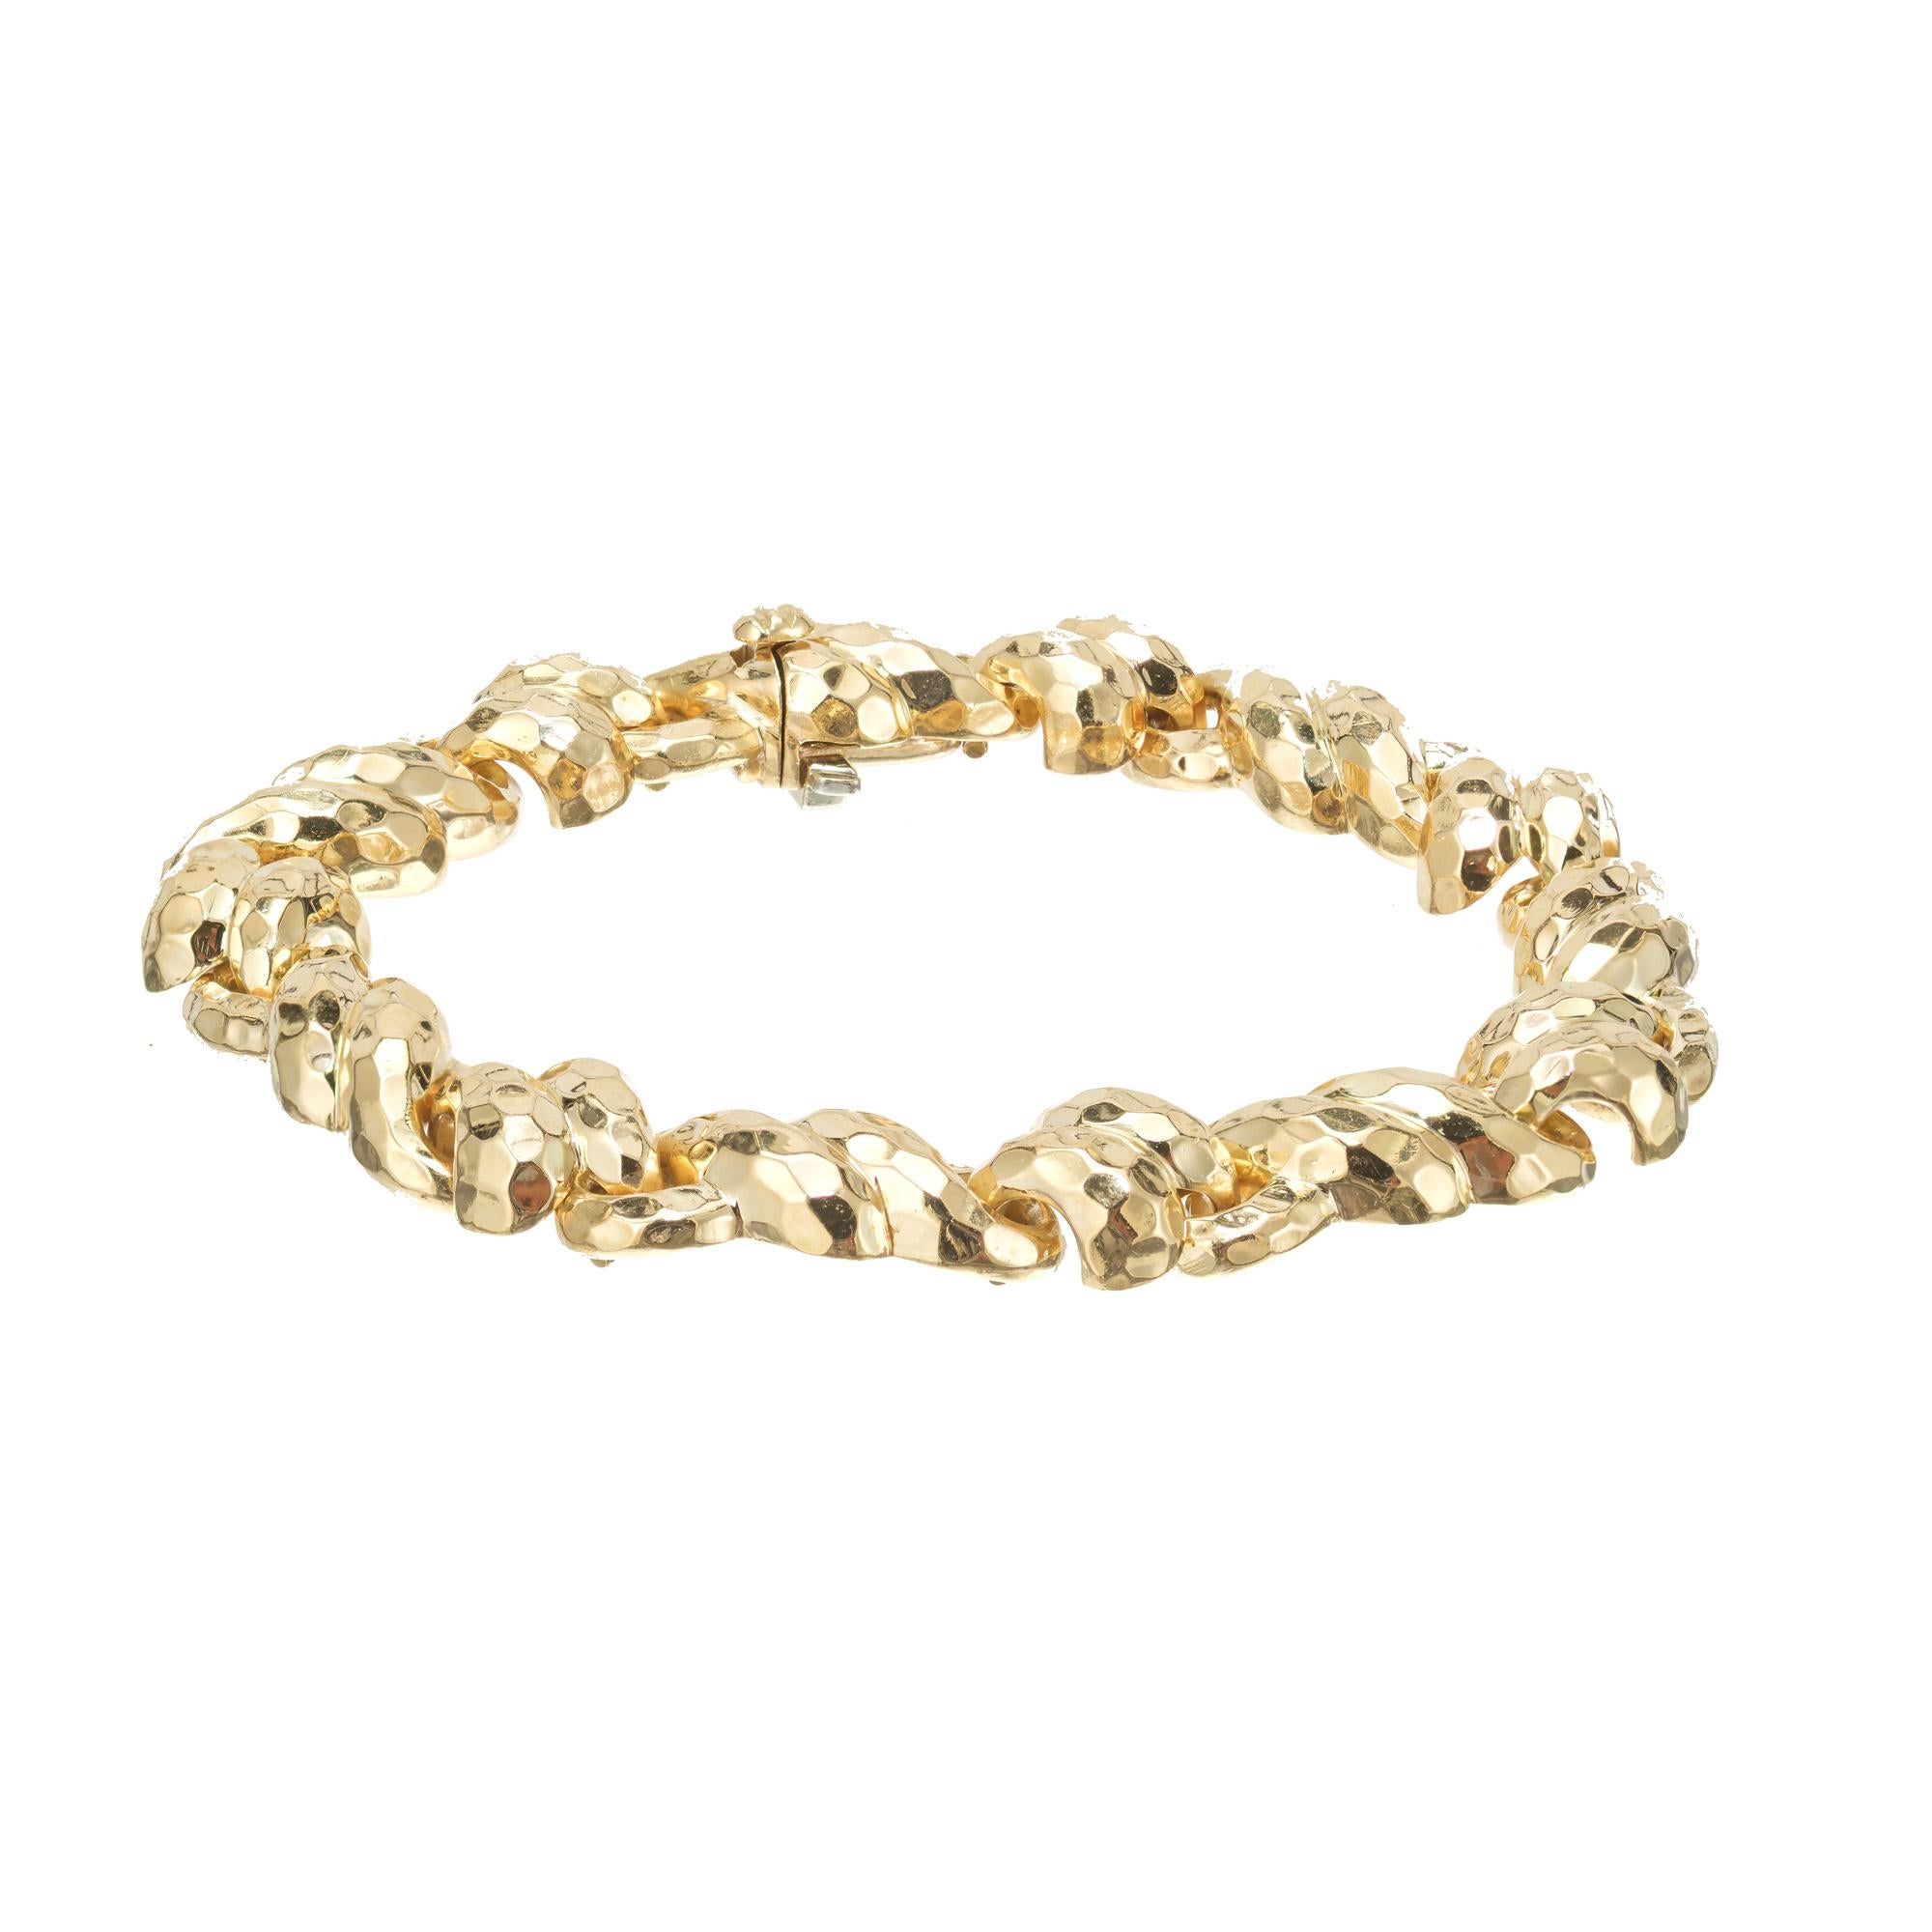 Shiny textured solid 18k yellow gold link bracelet by jeweler artist and designer Claus Vollrath. Built in catch and underside safety. 
German born Claus Vollrath was trained in his native country which led him to Cartier and later opening his own